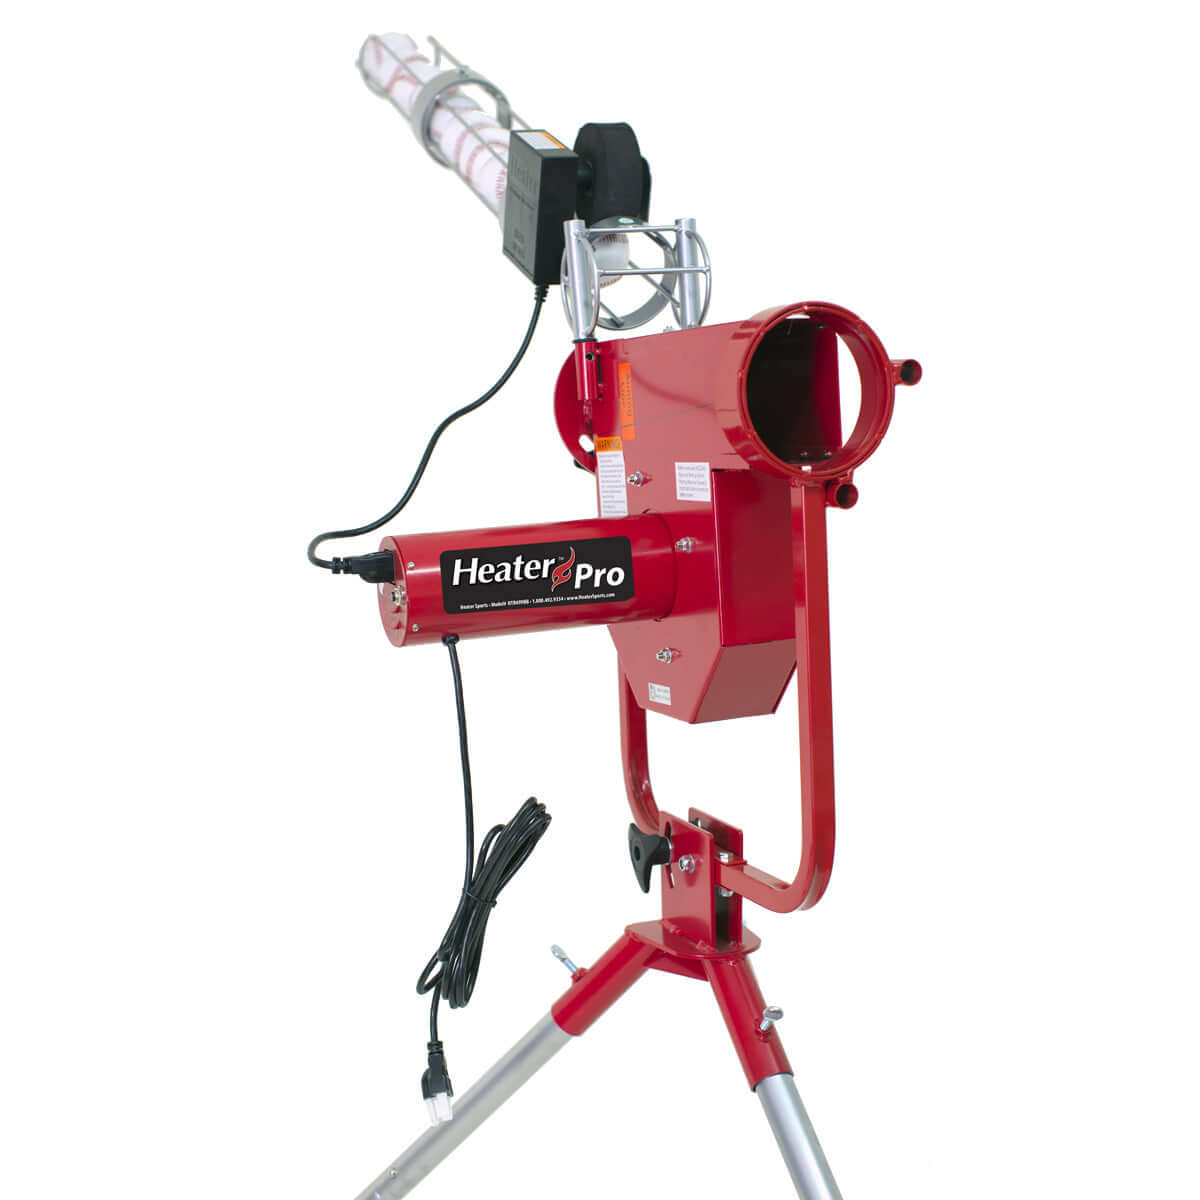 Fastball & Curveball 52 MPH Pitching Machine With Auto Ball Feeder-Heater Sports - Pitch Machine Pros